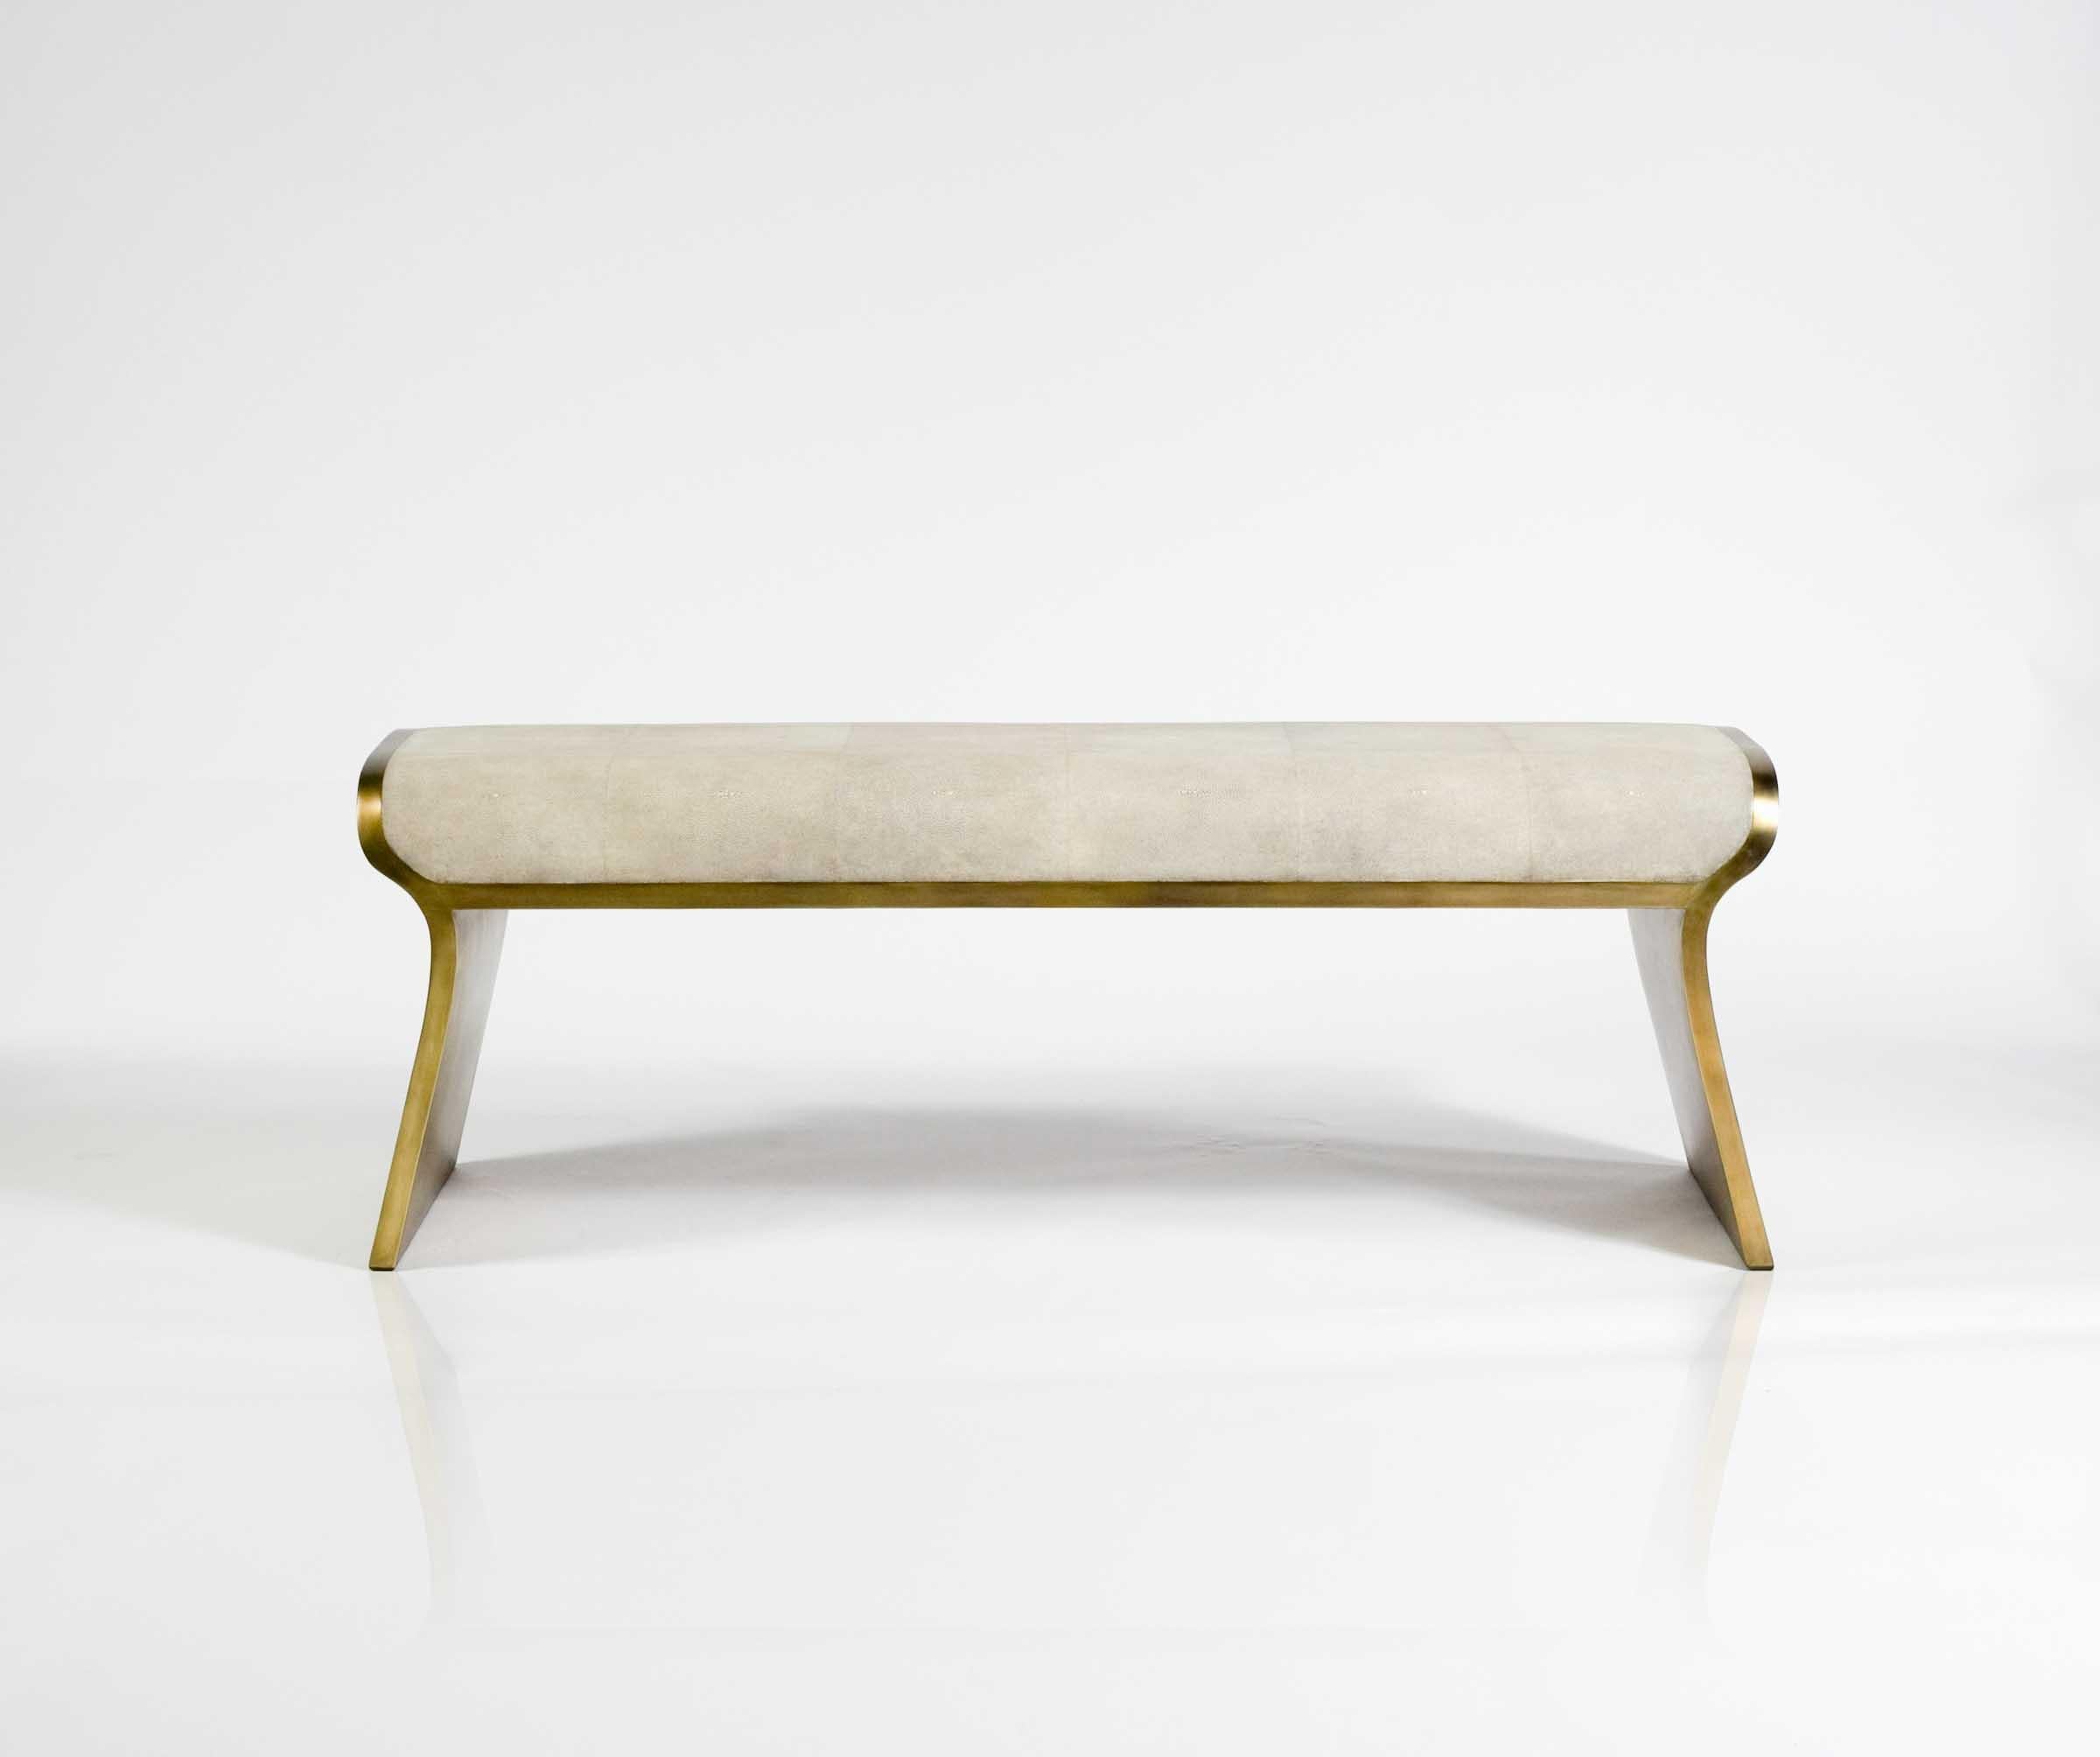 Hand-Crafted Dandy Day Bench in Mink Shagreen and Bronze-Patina Brass by Kifu Paris For Sale